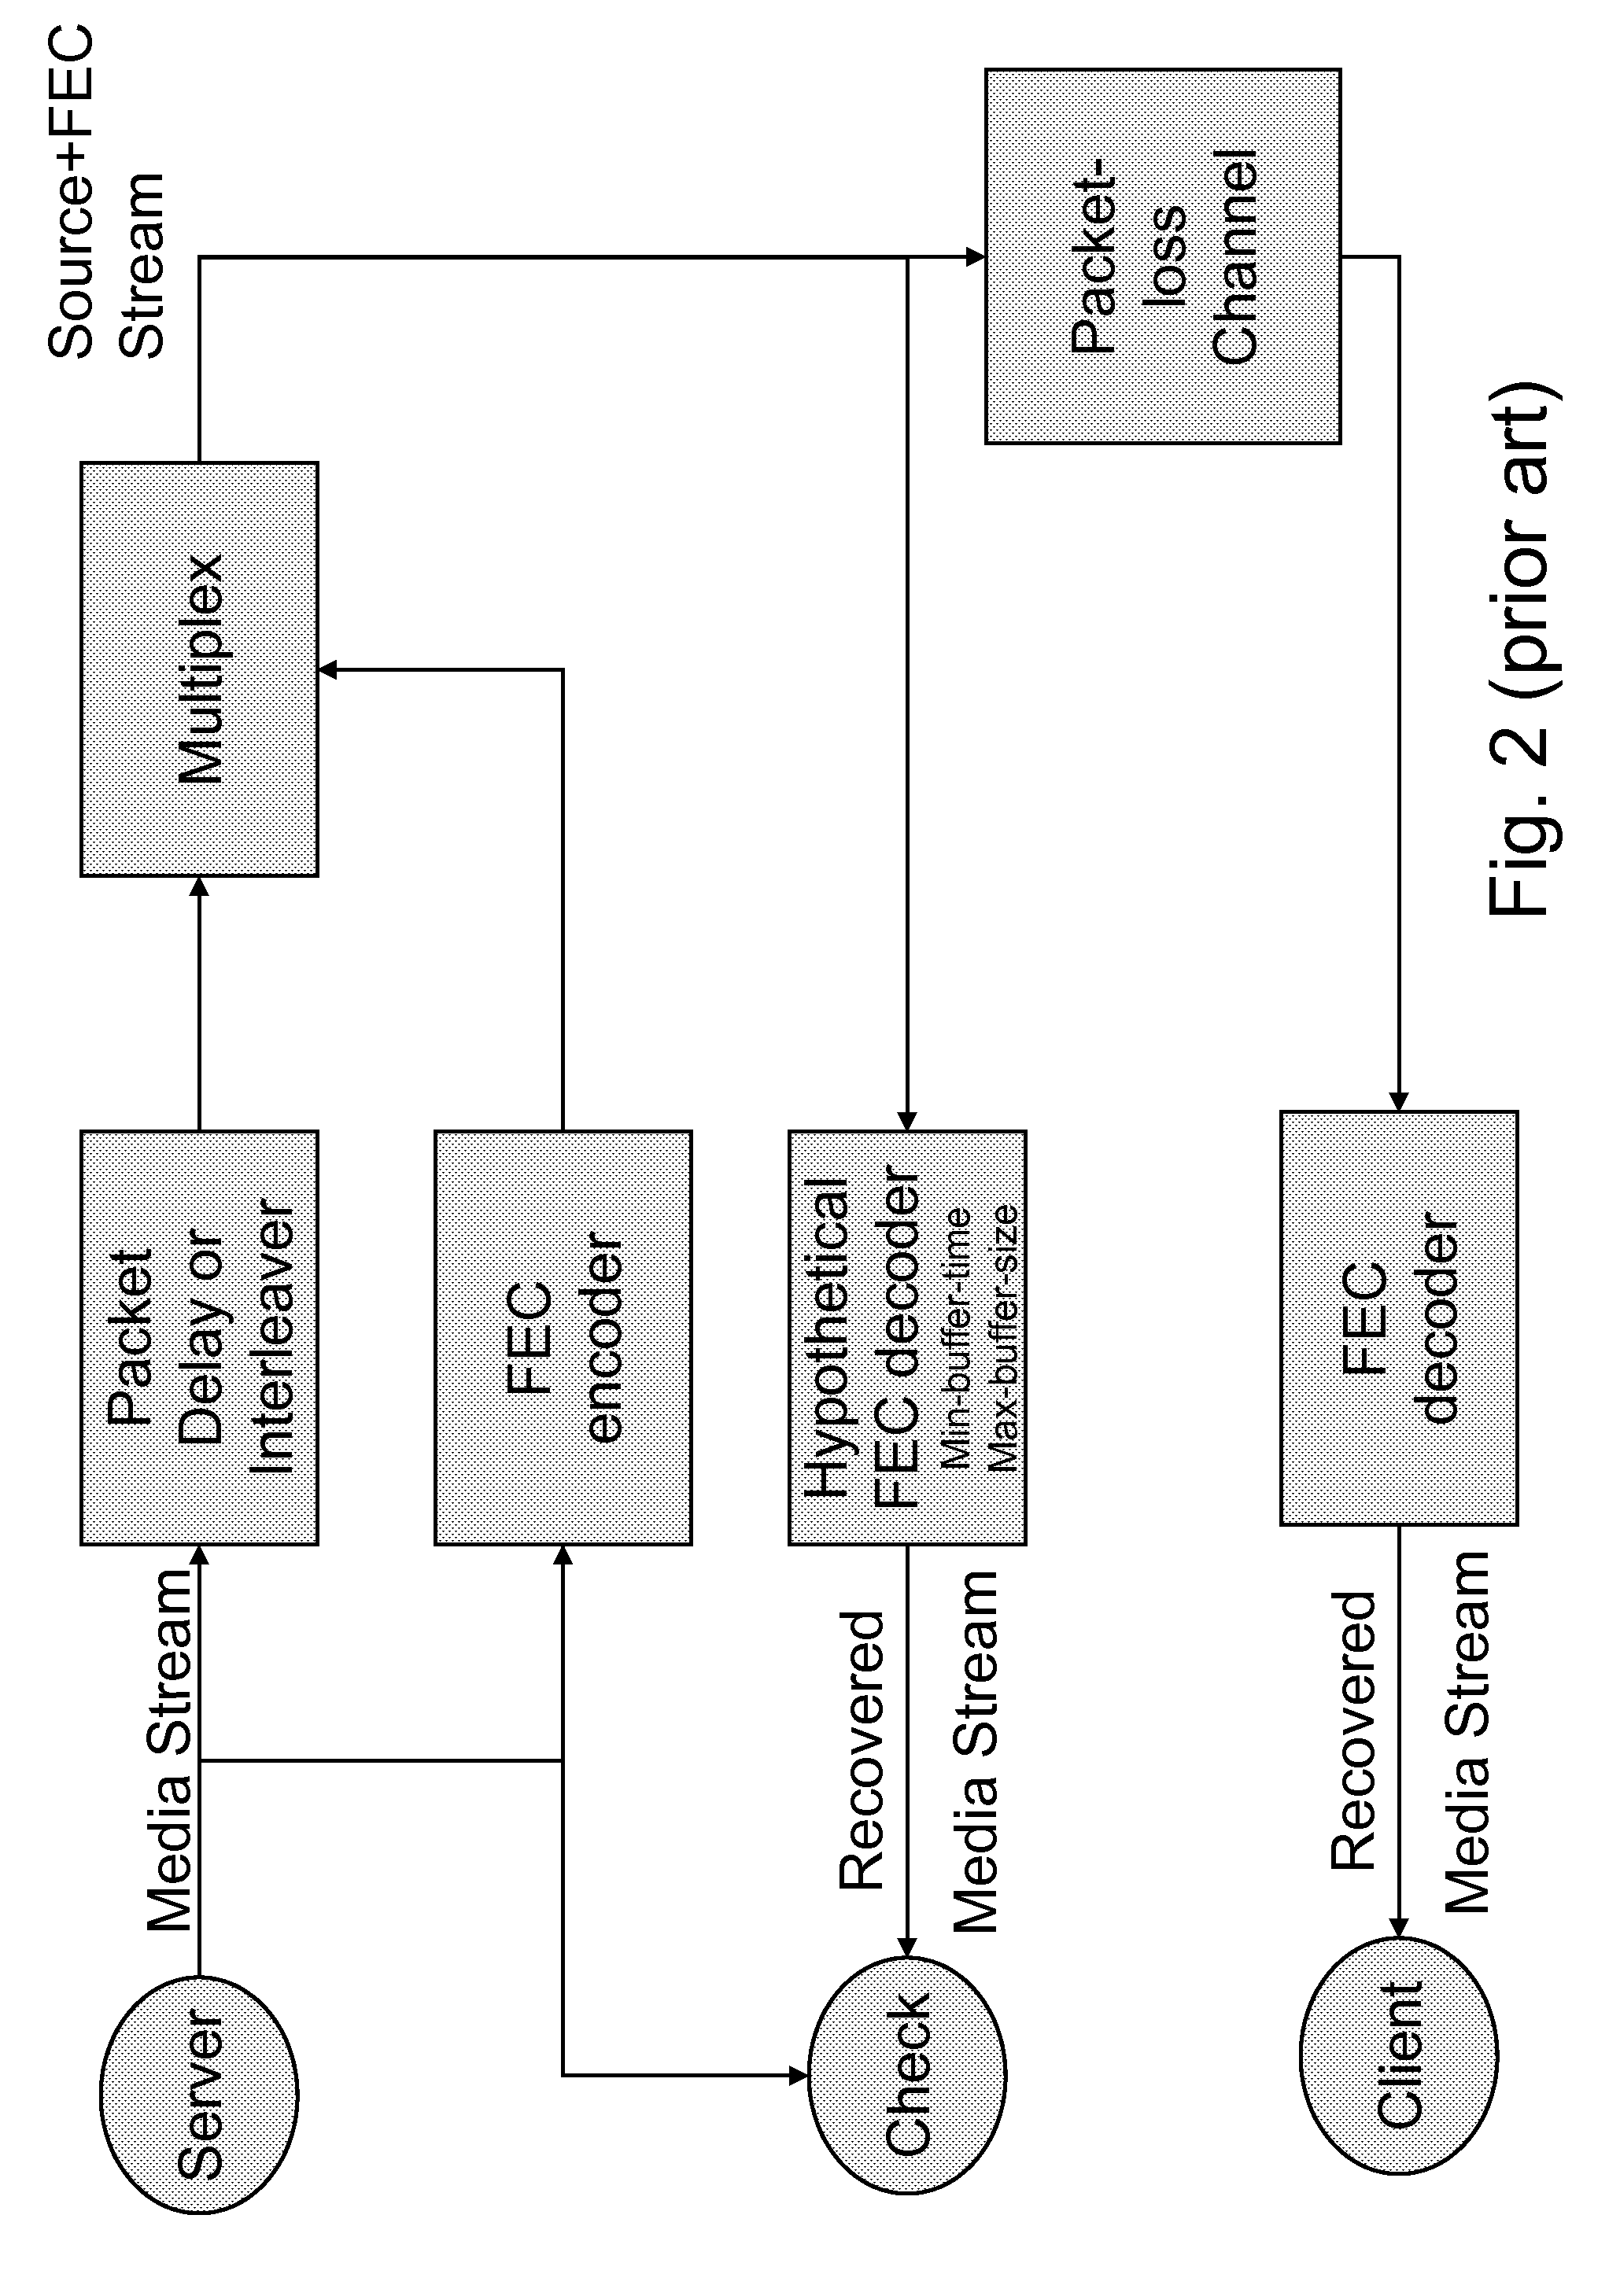 Hypothetical fec decoder and signalling for decoding control